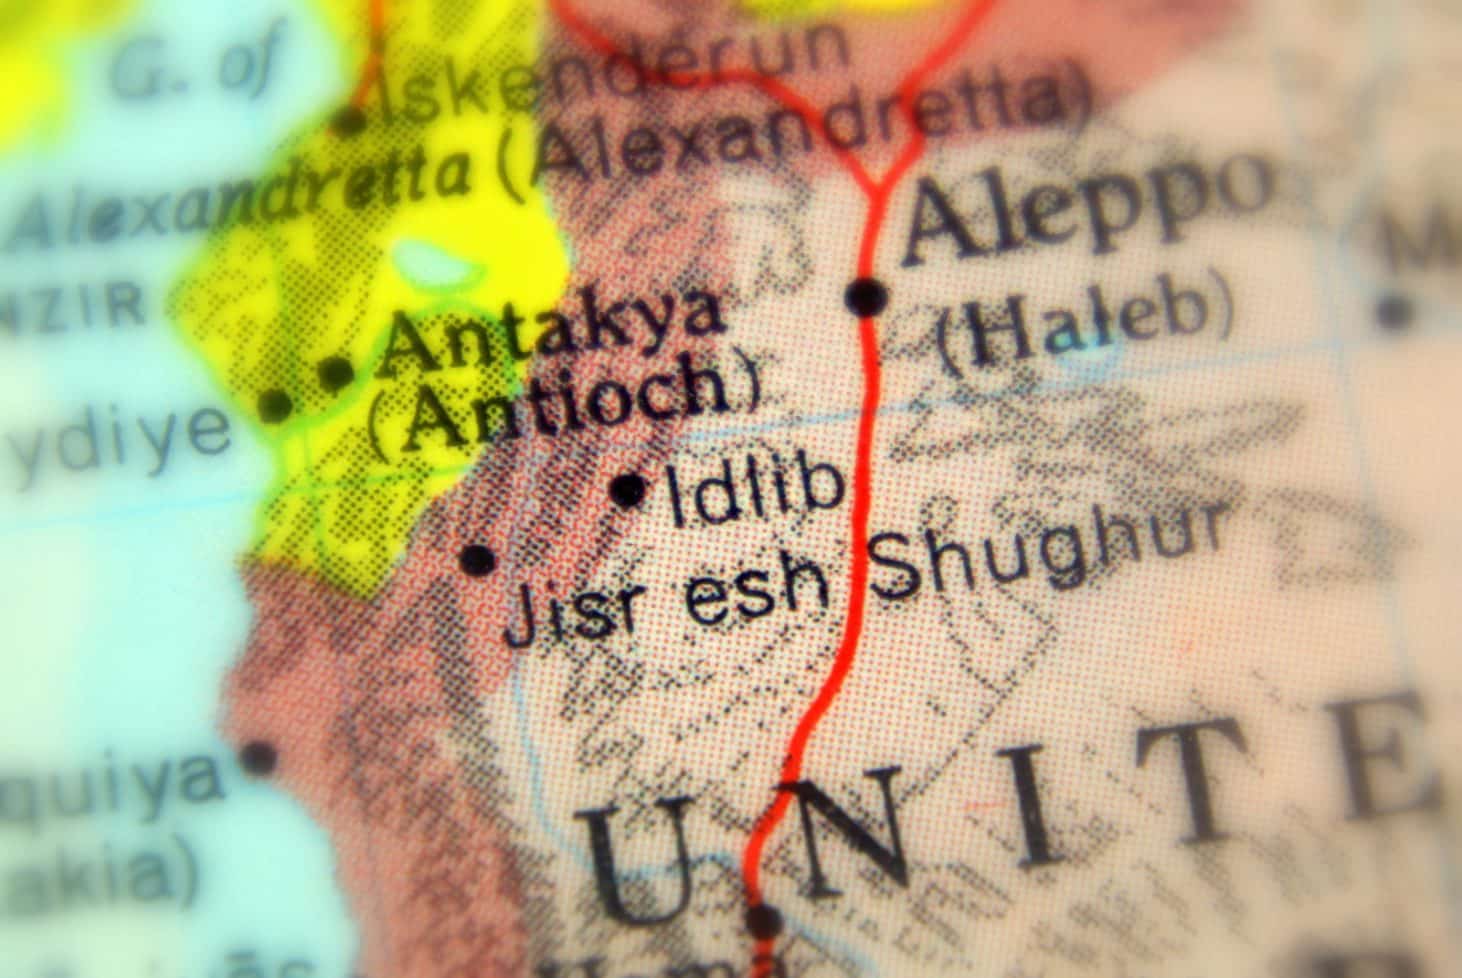 Idlib, a city in Syria on a map (selective focus)